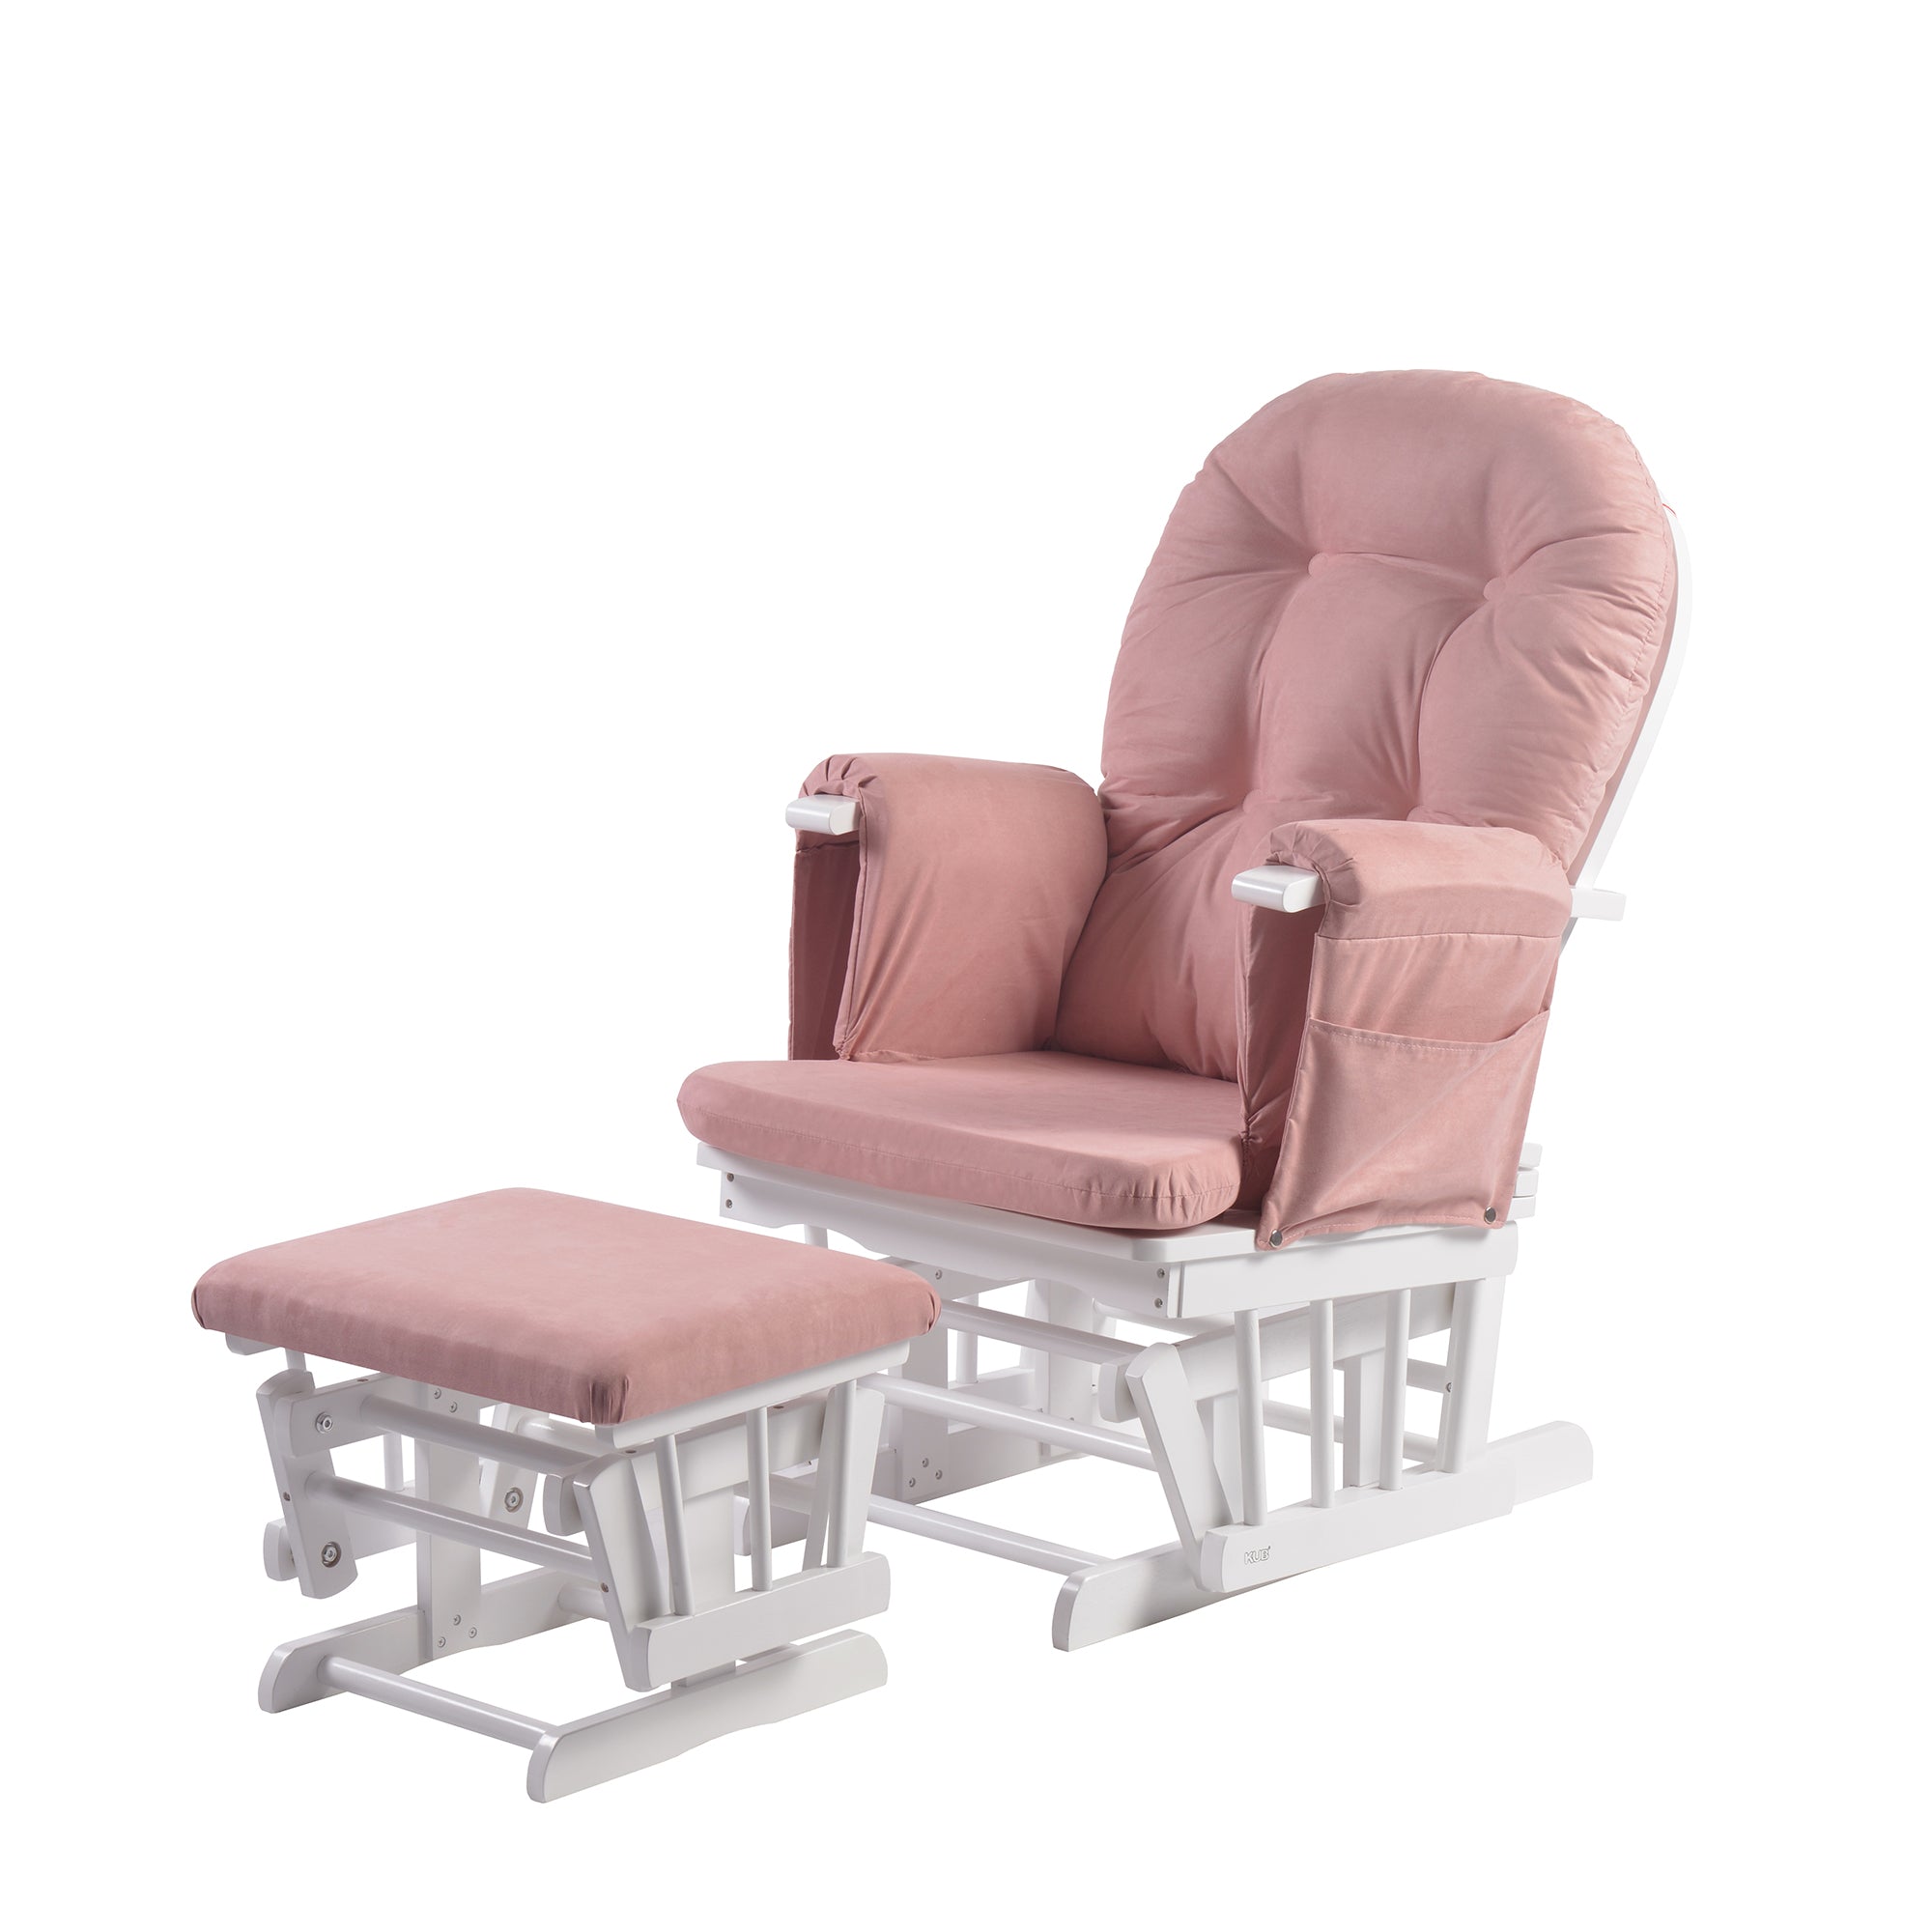 Haywood Reclining Nursing Chair and Footstool Dusky Pink